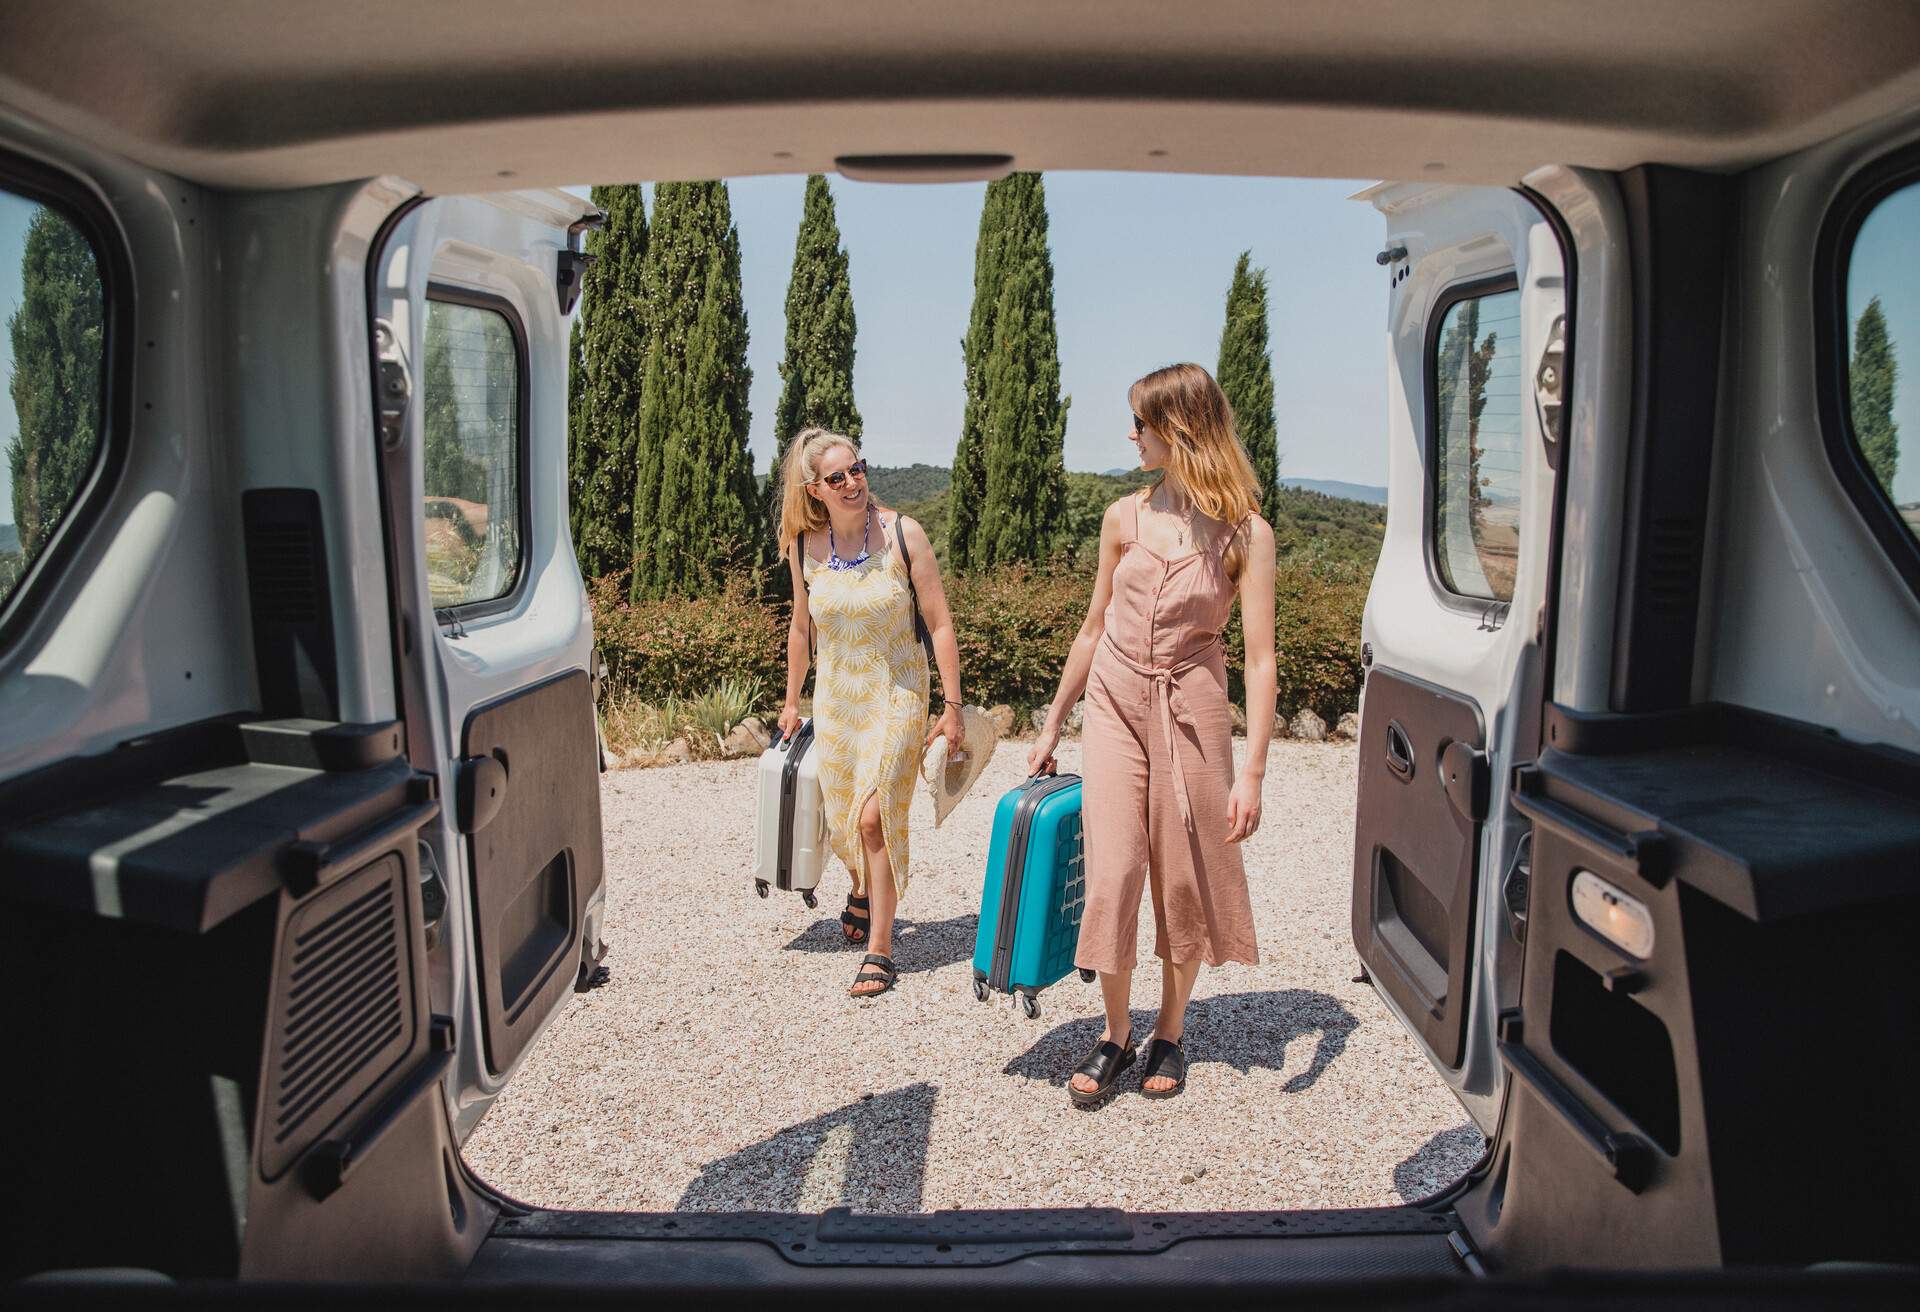 DEST_ITALY_THEME_PEOPLE_CAR_TRAVEL_LUGGAGE_ROADTRIP-GettyImages-1071459200